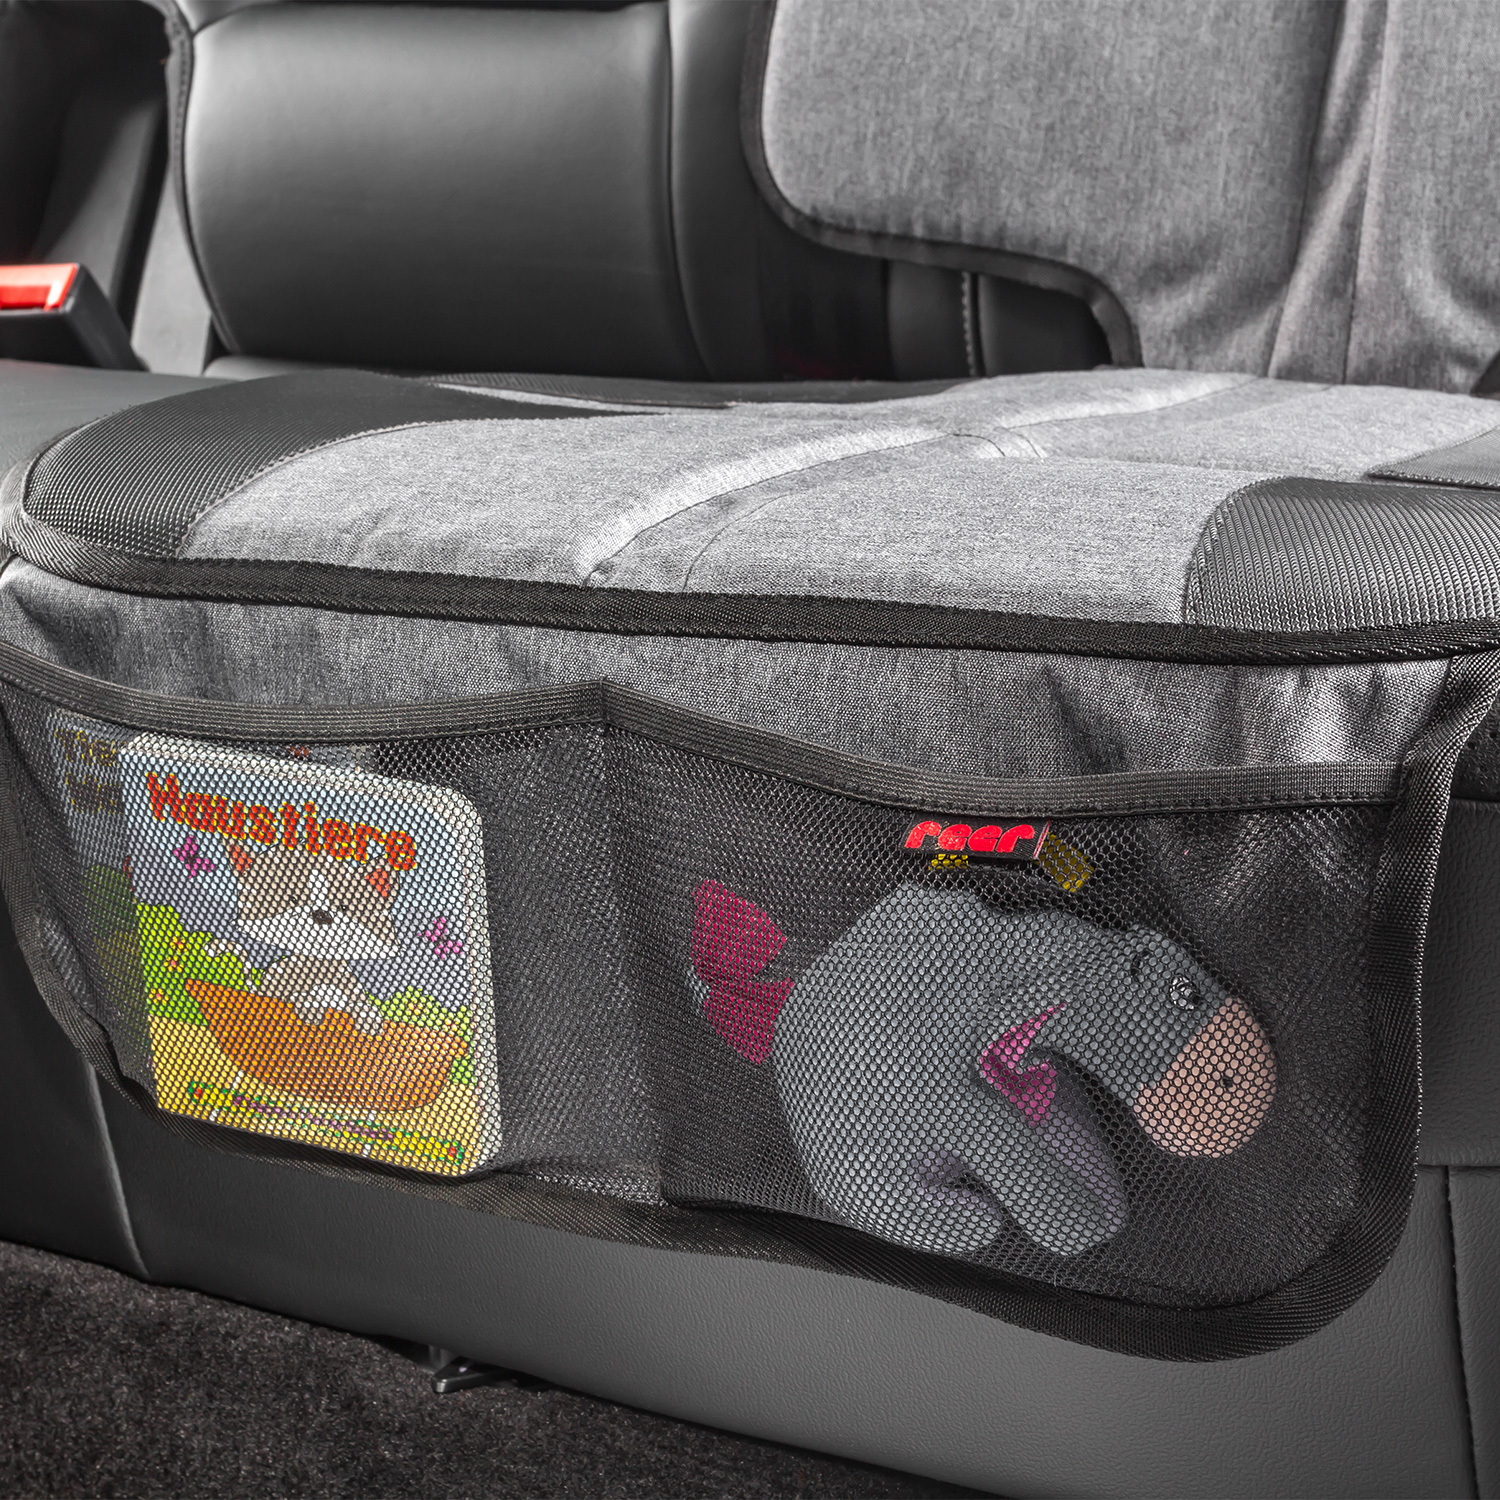 Reer TravelKid Protect Car Seat Protection Pad buy online